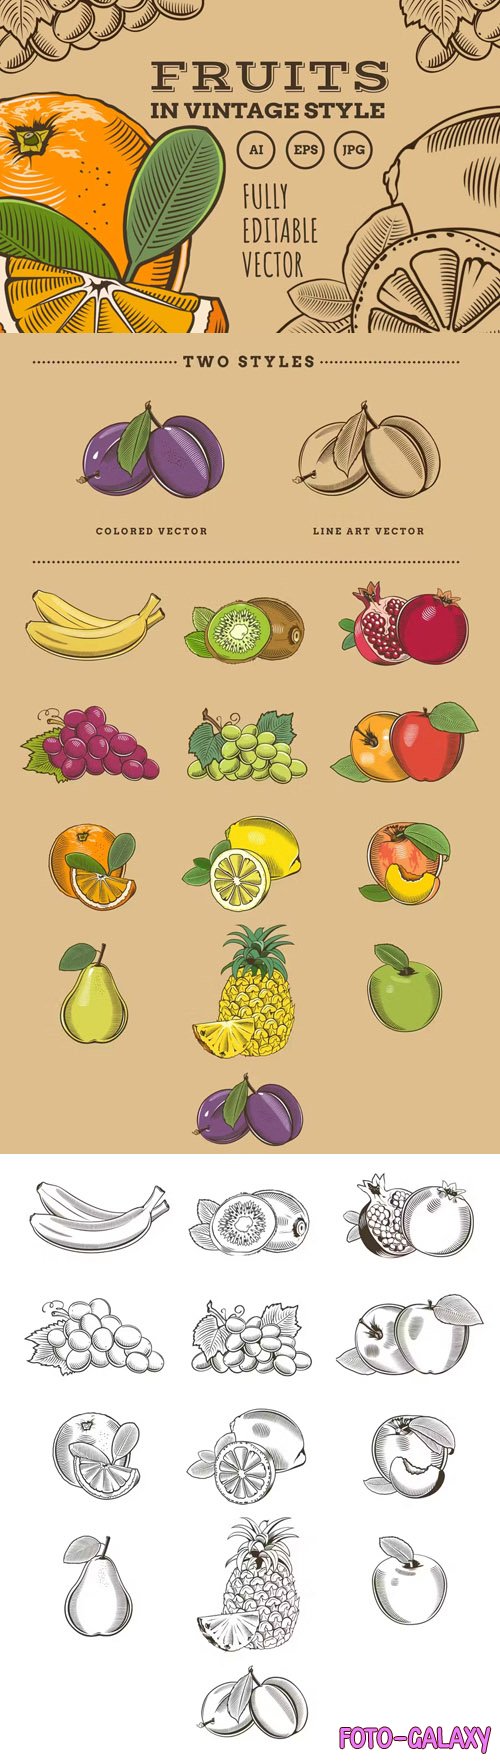 Fruits in Vintage Style - Vector Illustrations